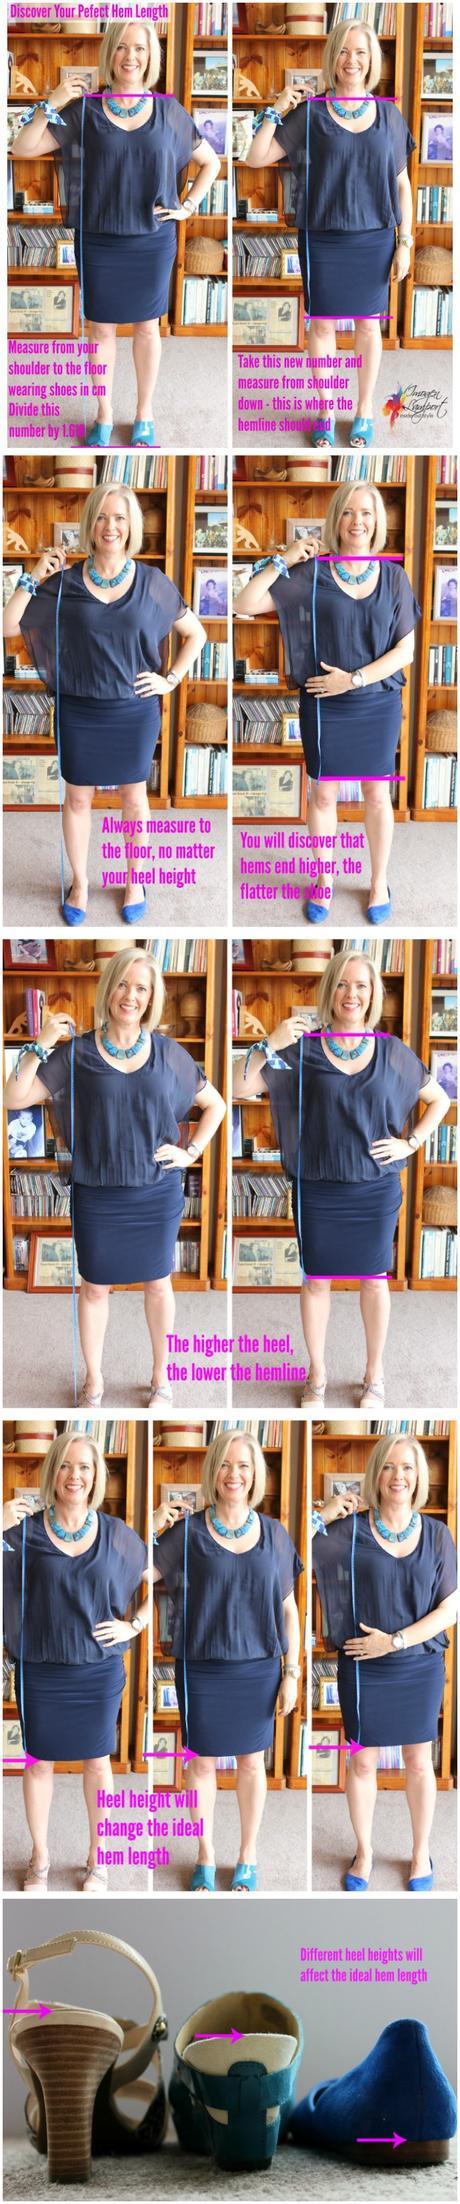 How to Find Your Ideal Skirt or Dress Hem Length